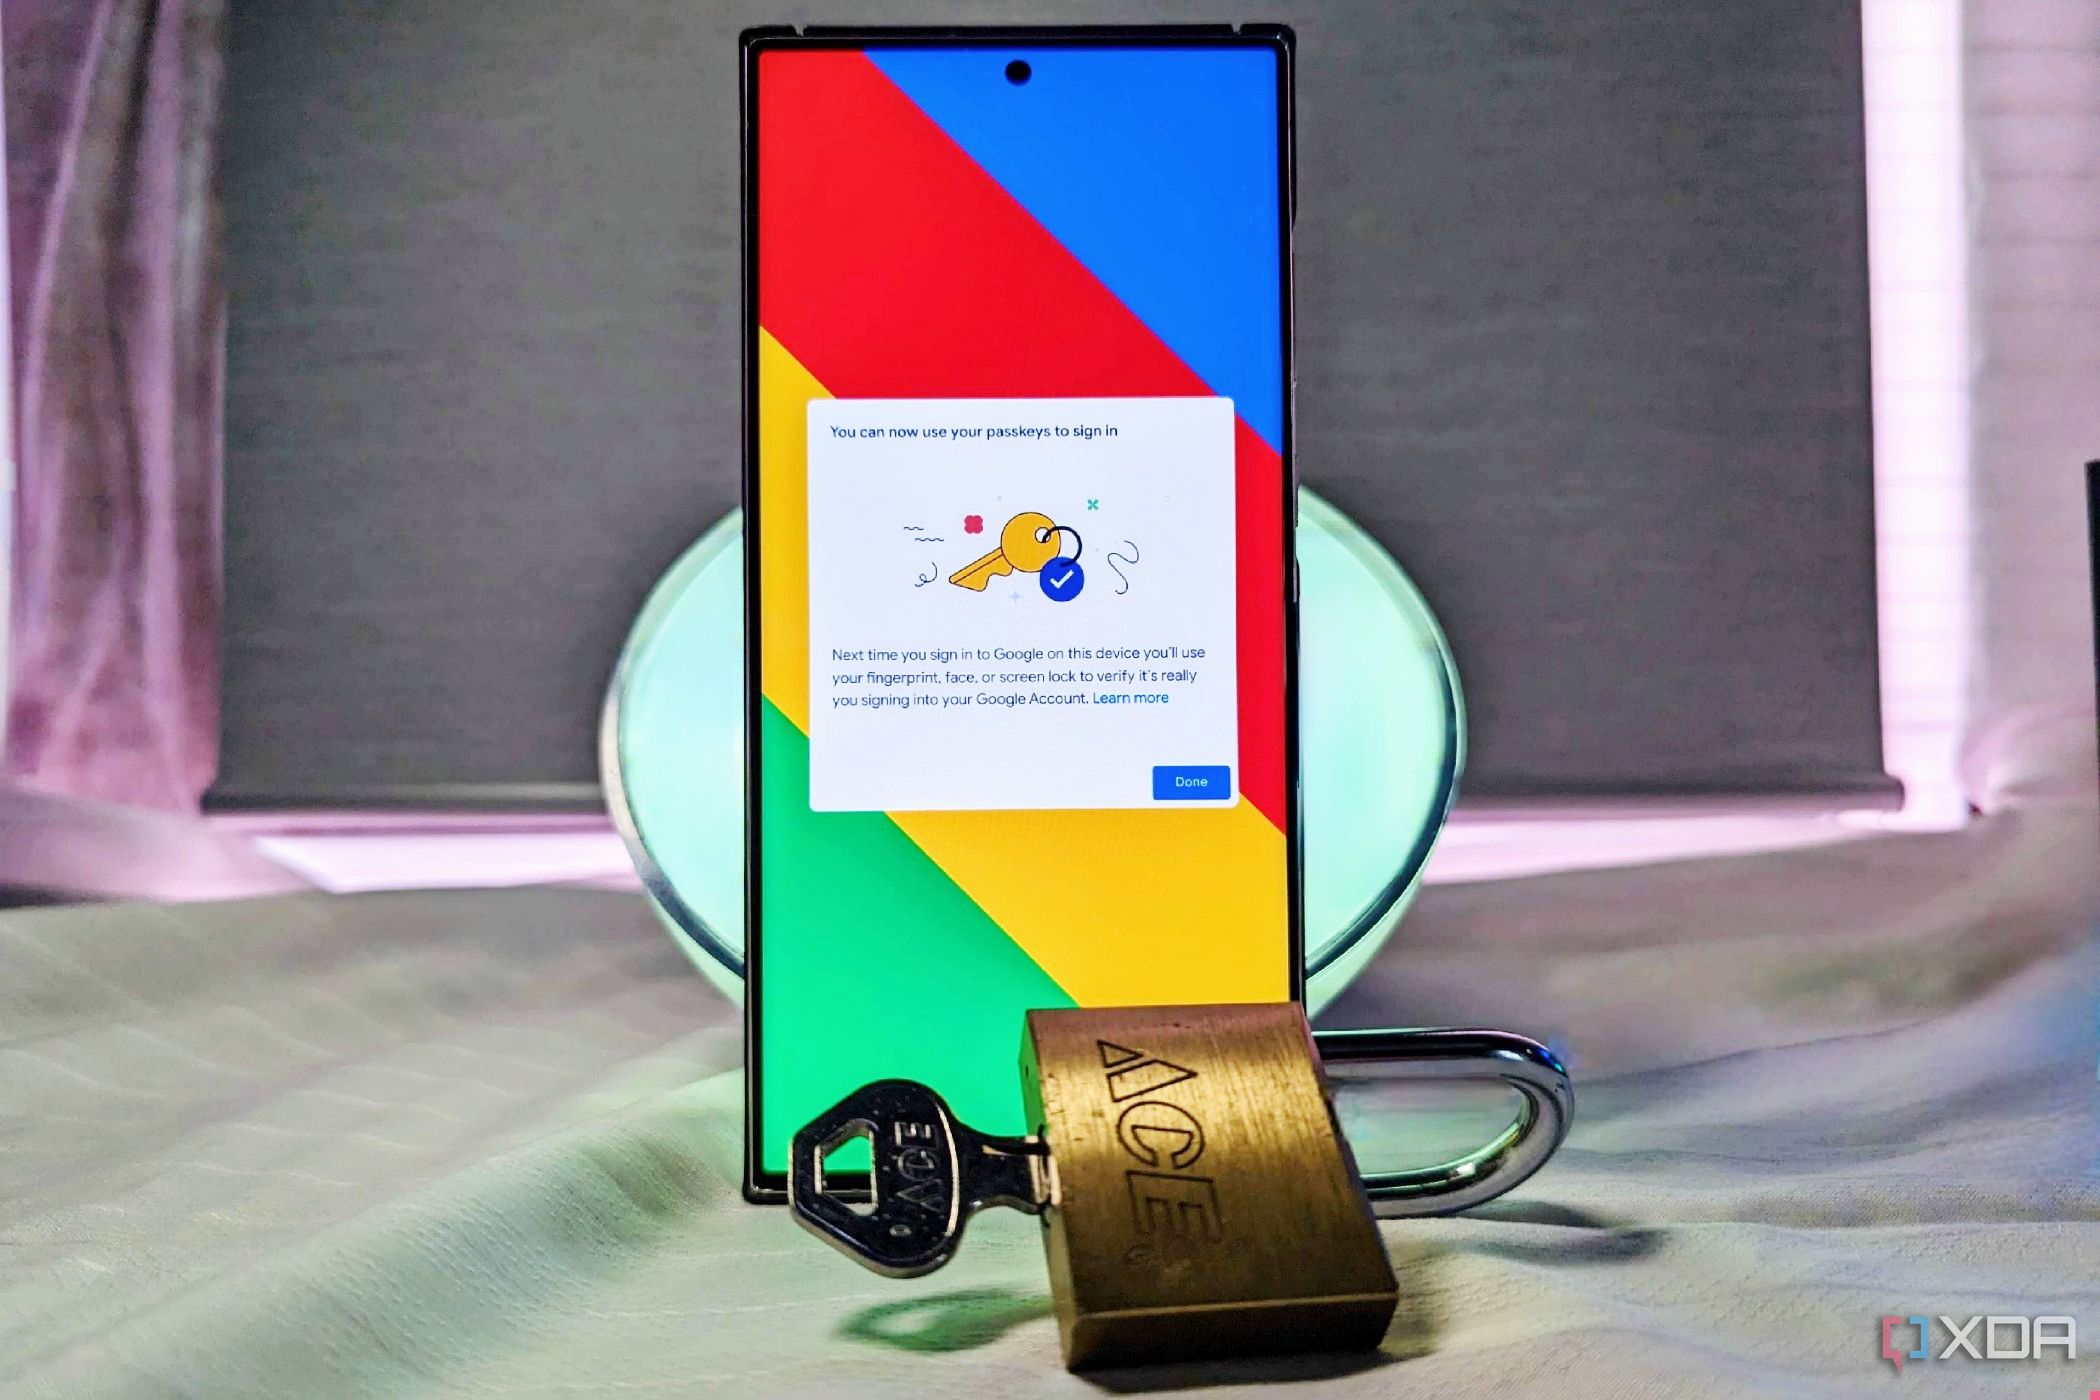 Samsung Galaxy S23 Ultra with confirmation on the screen beside a padlock and key